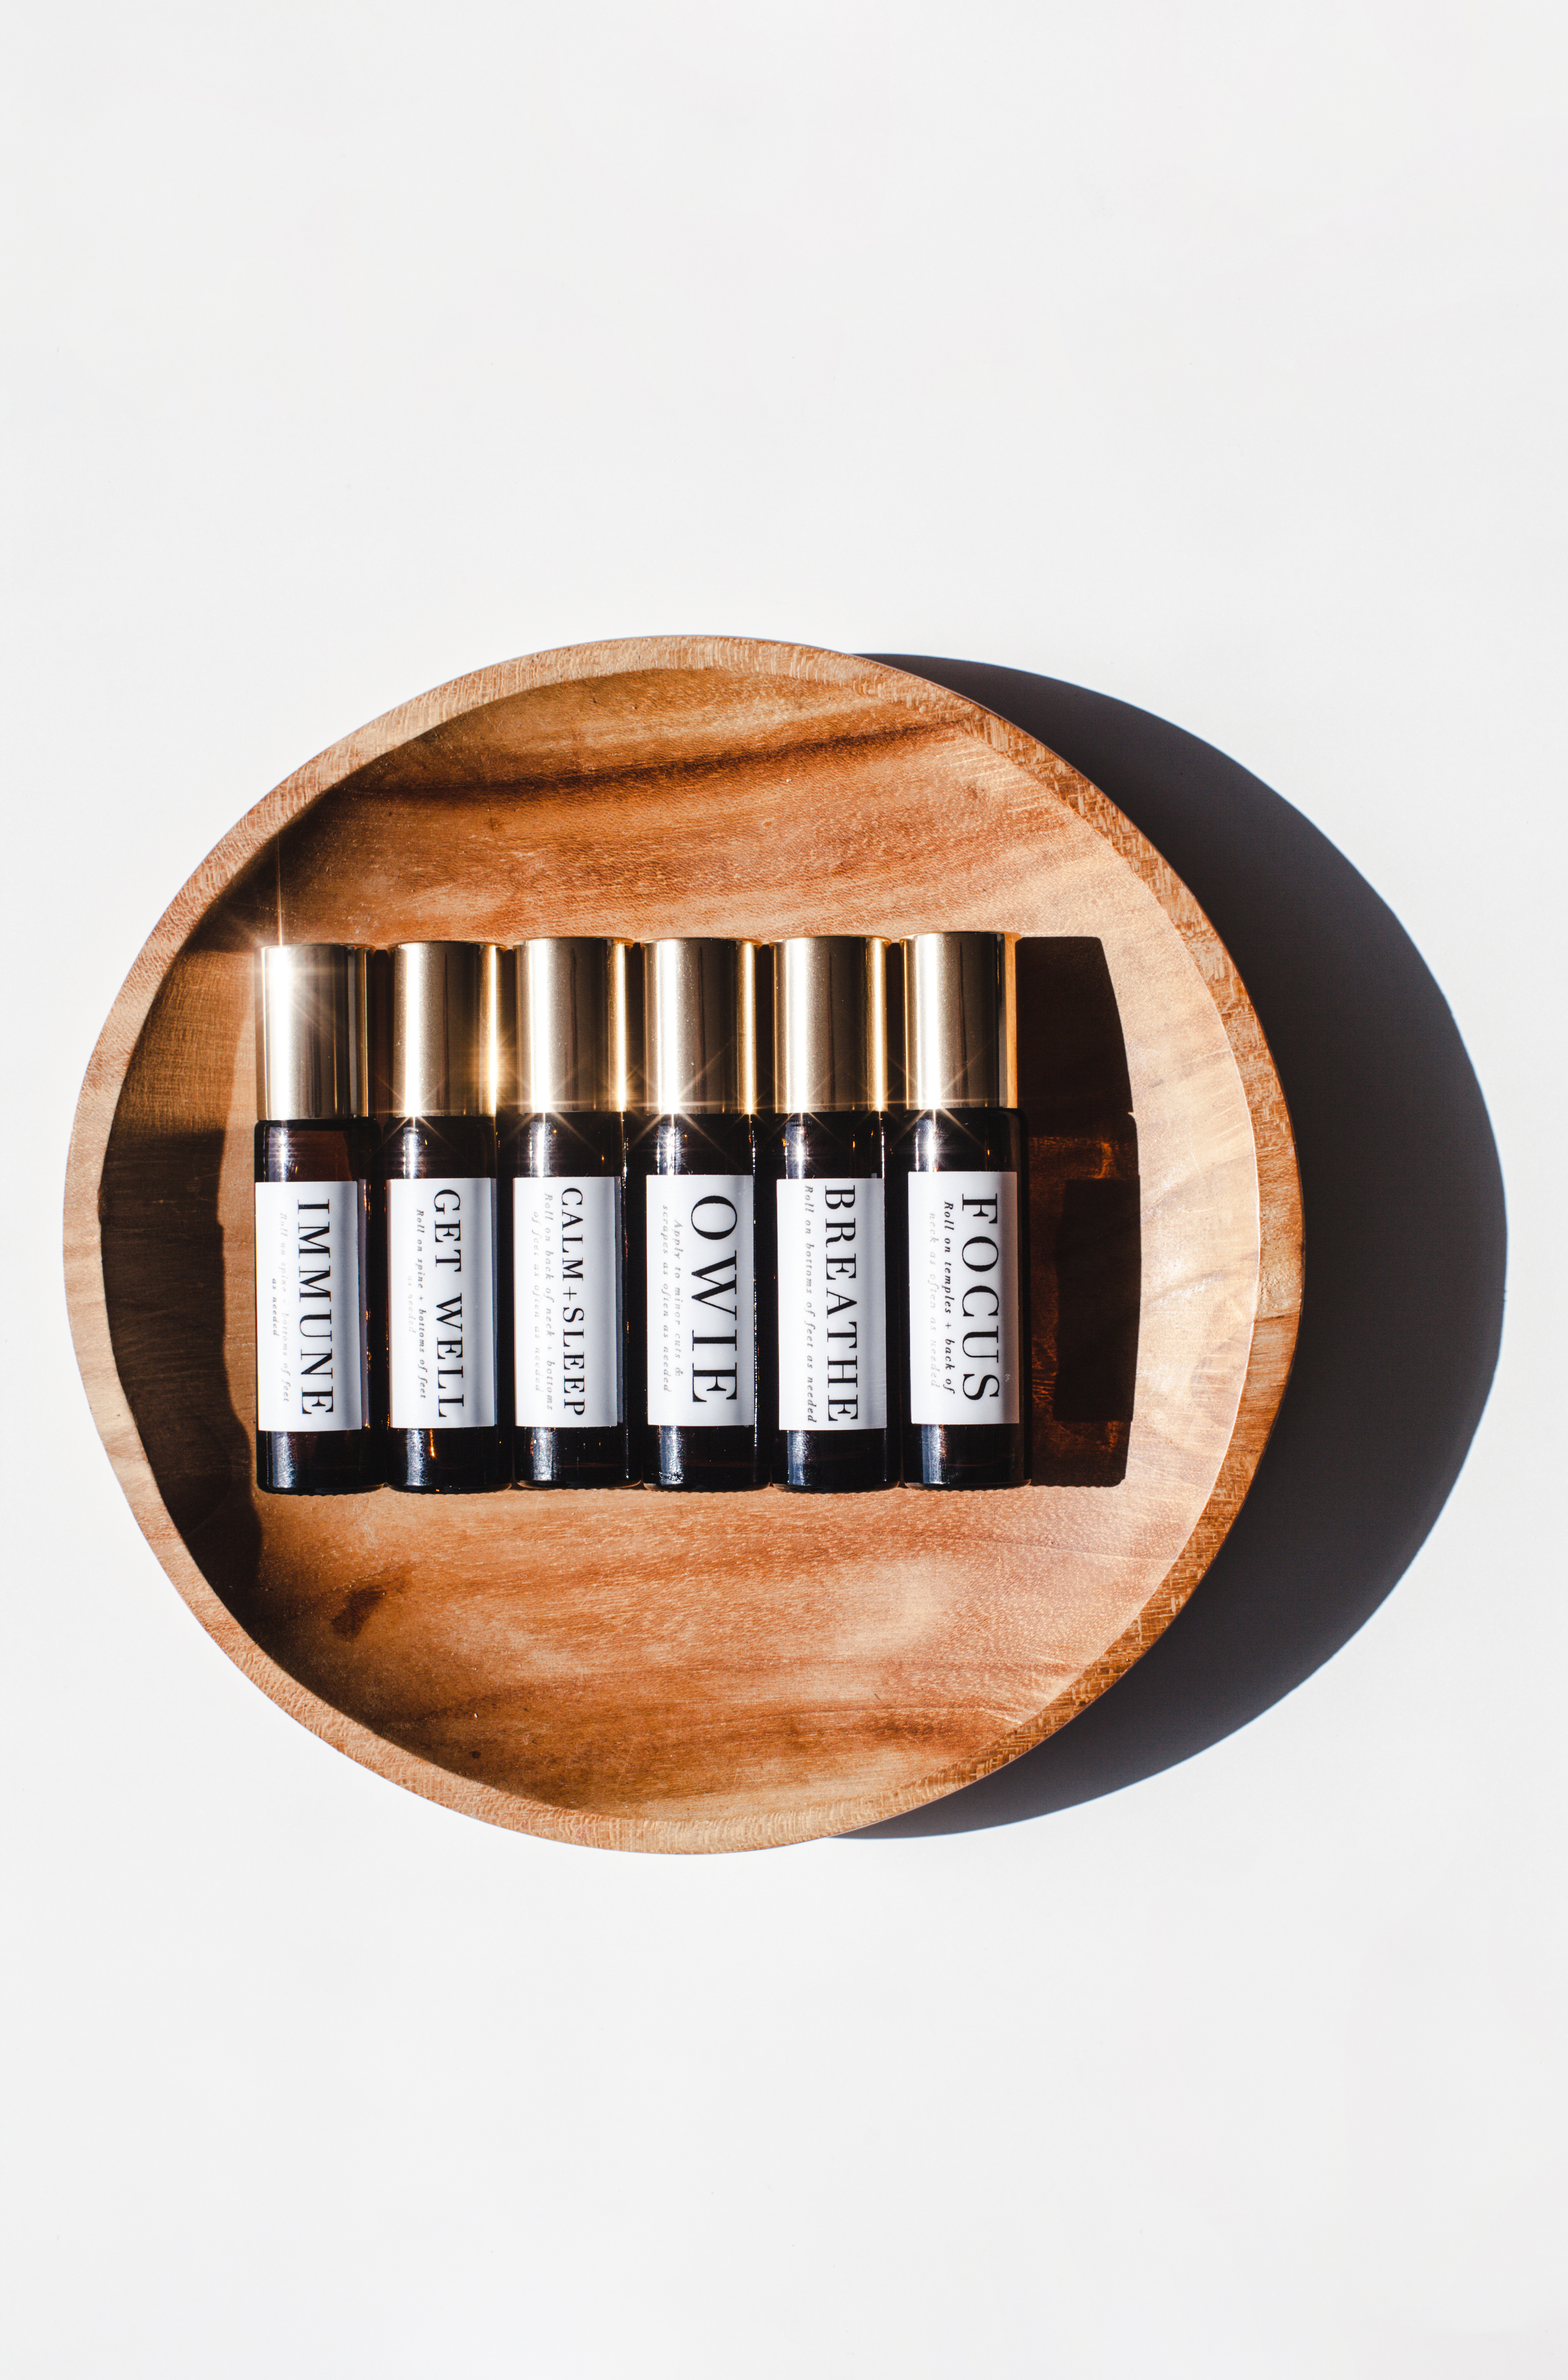 Save 25% off your doTERRA essential oils